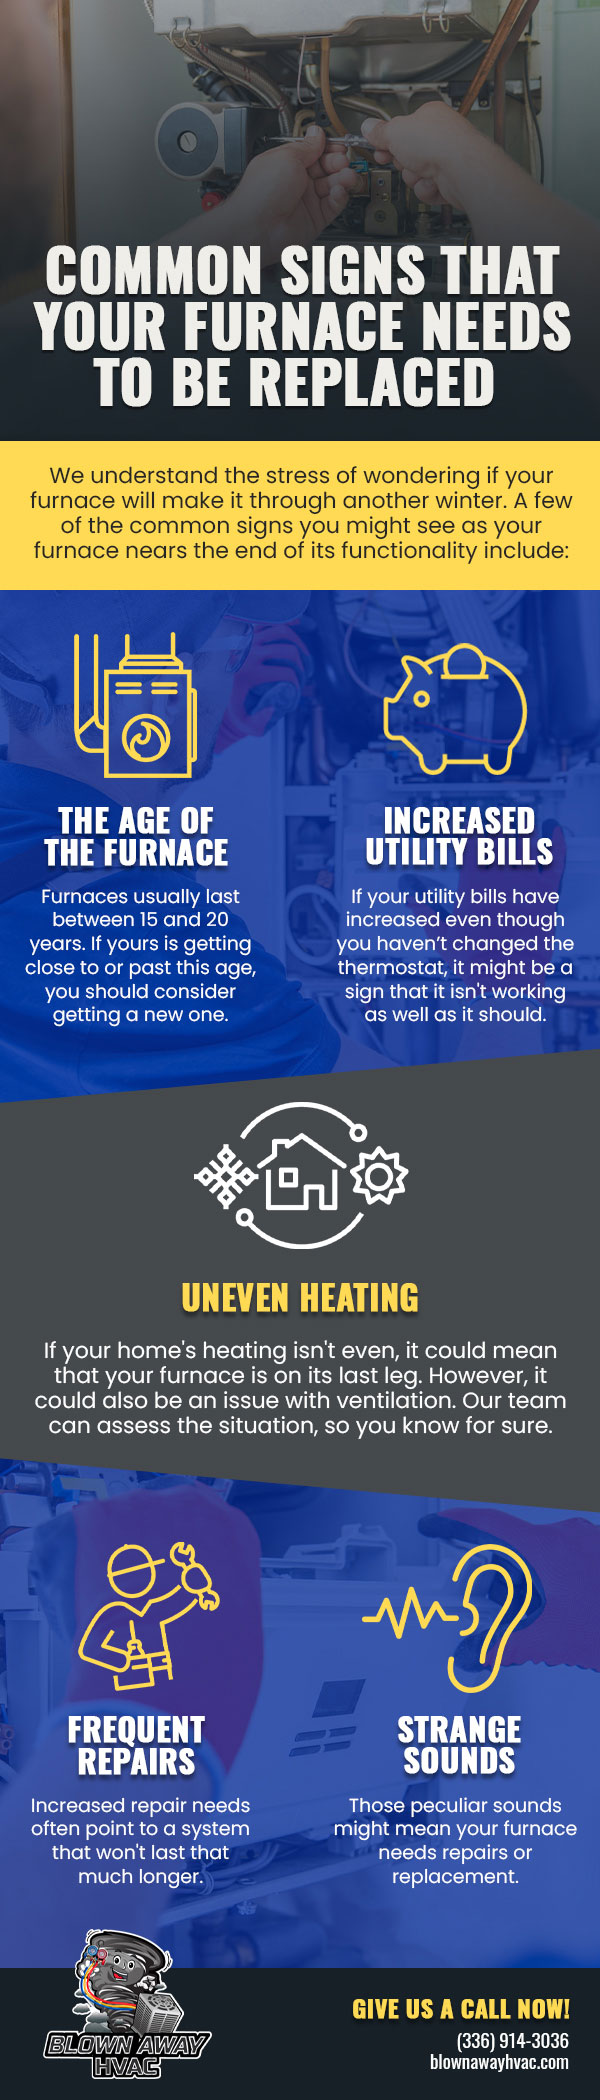 Common Signs That Your Furnace Needs to be Replaced